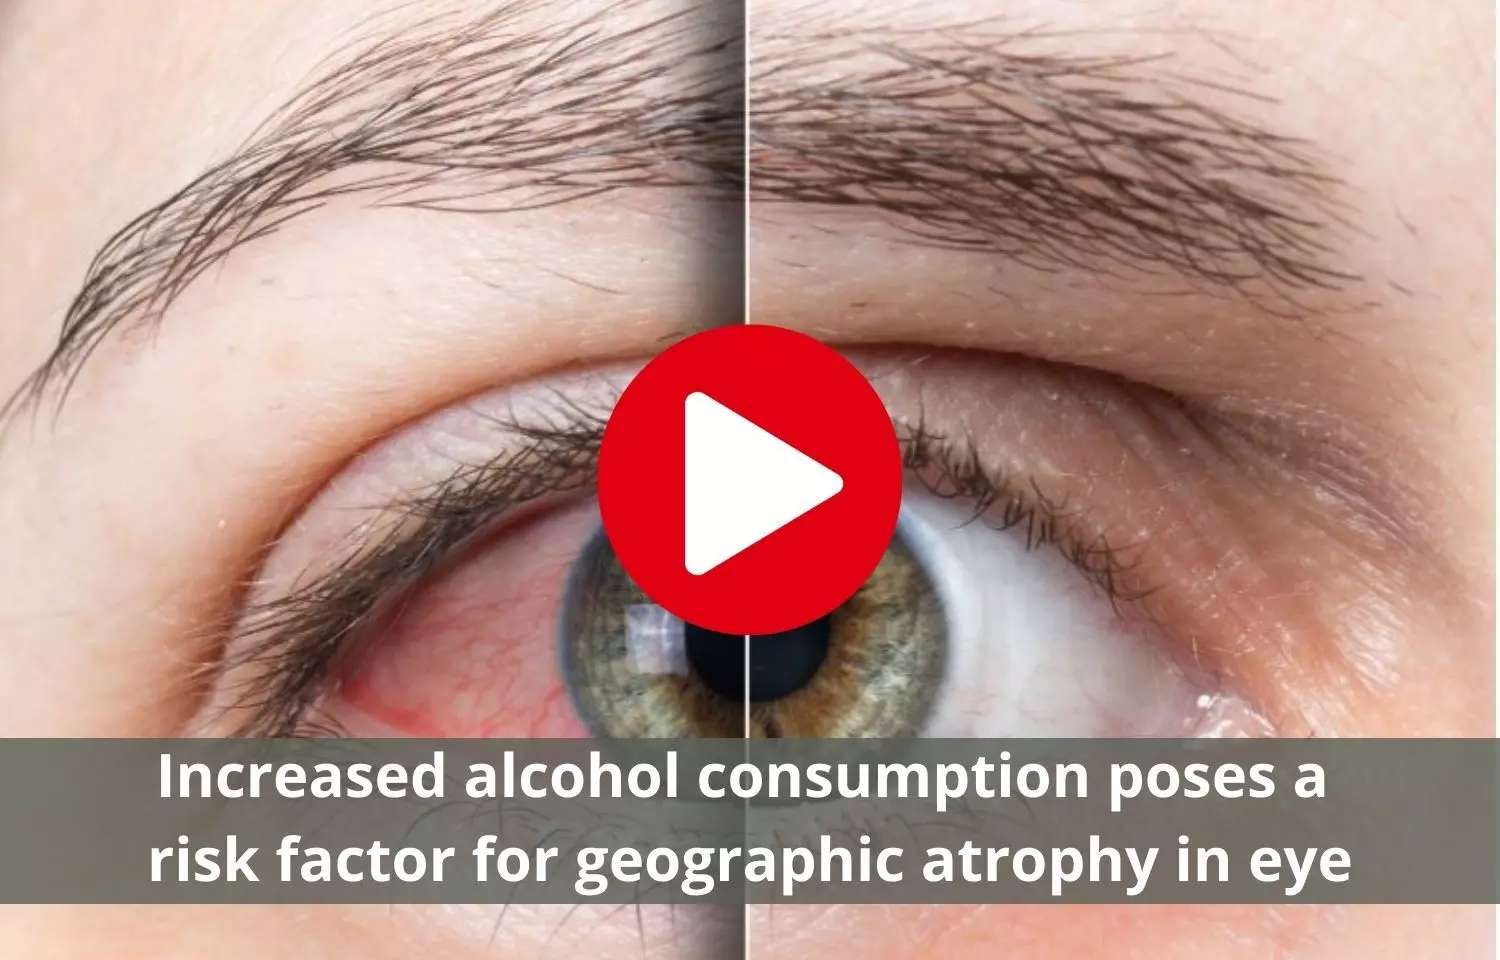 Increased alcohol consumption poses a risk factor for geographic atrophy in eye